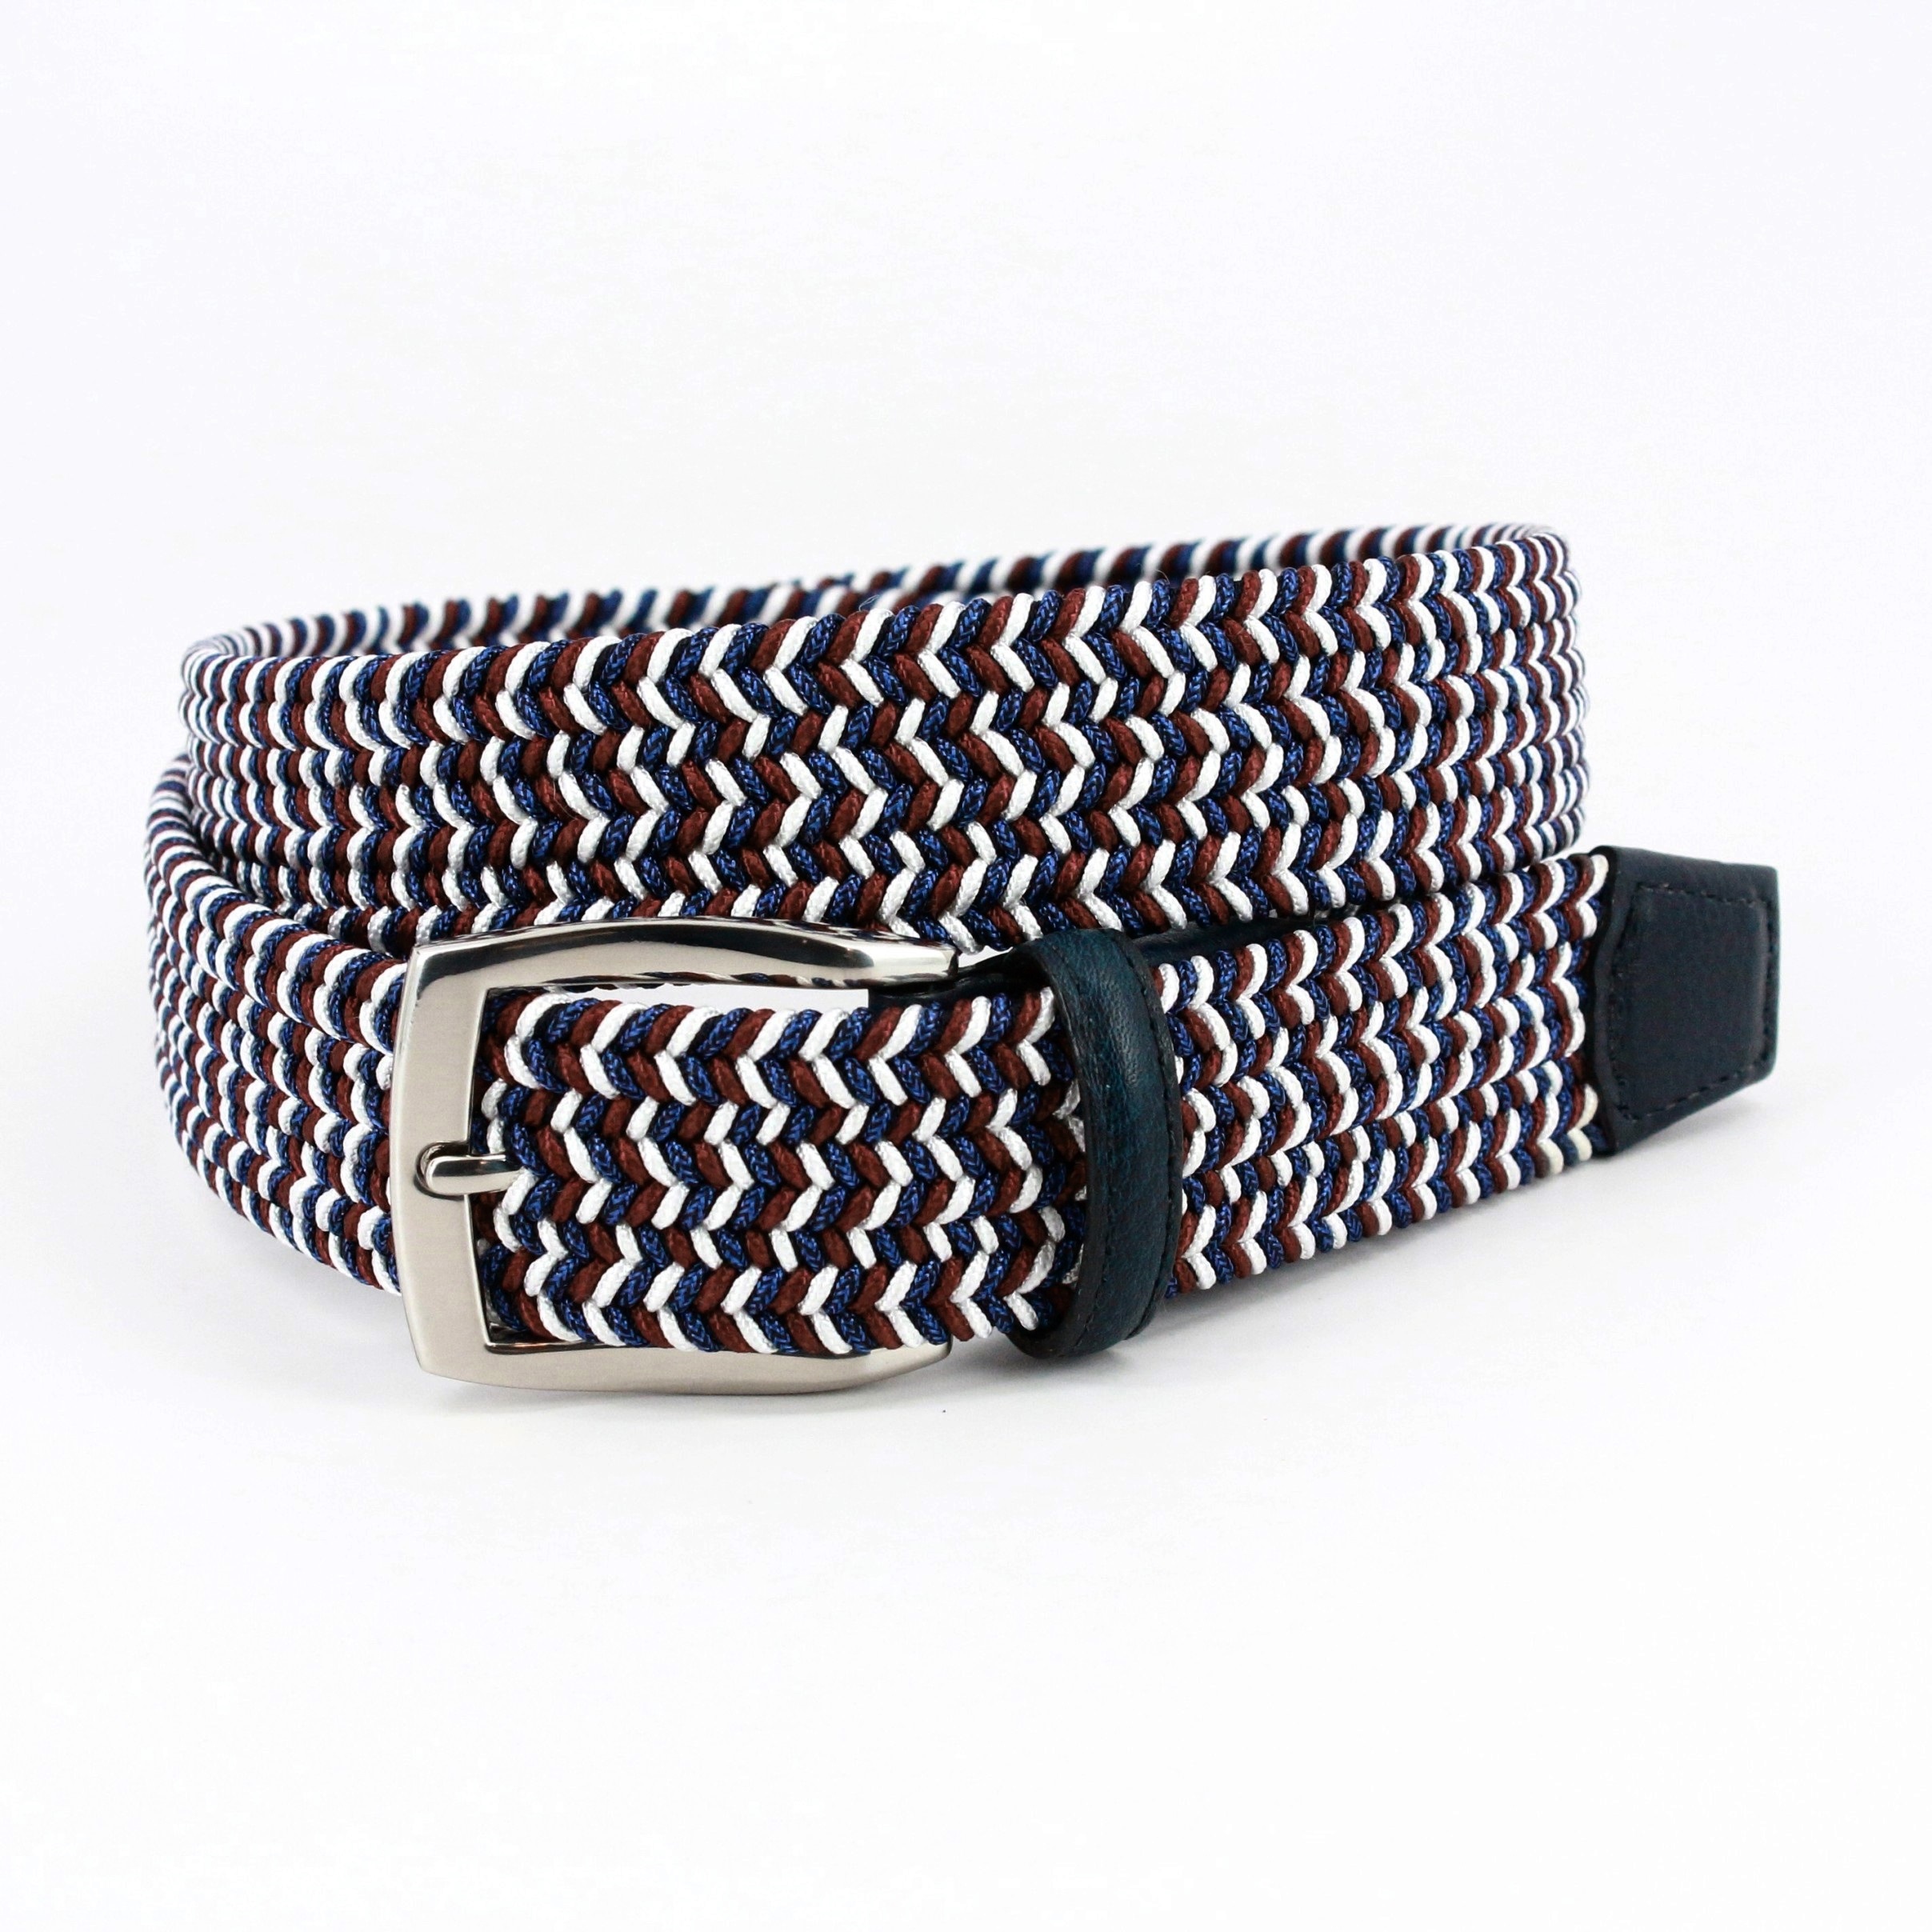 Italian Braided Stretch Belt in Red and White by Torino Co. - Hansen's Clothing